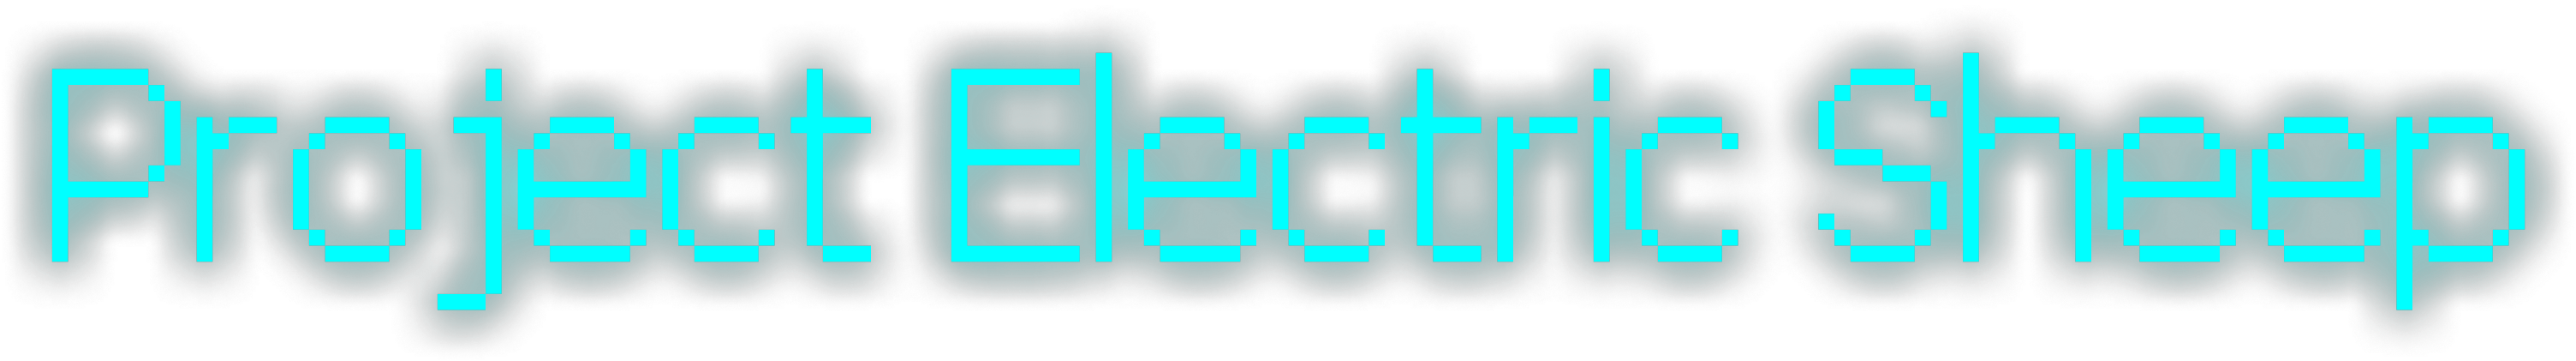 Logo for Project Electric Sheep, consisting of the text 'Project Electric Sheep'.